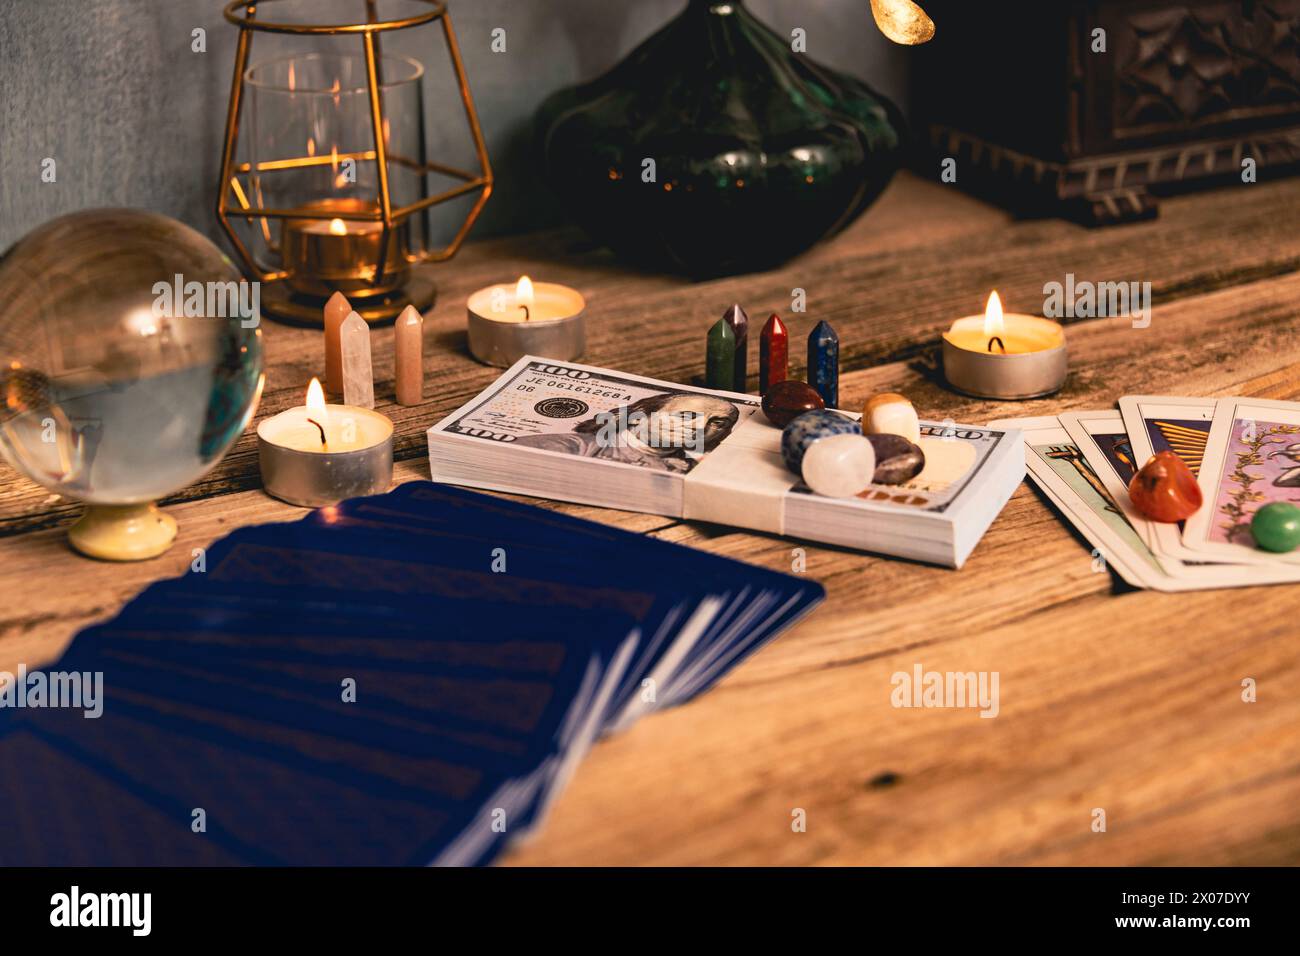 A tarot spread with The Fool card, hundred-dollar bills, and various crystals on a rustic wooden background with candles. Stock Photo